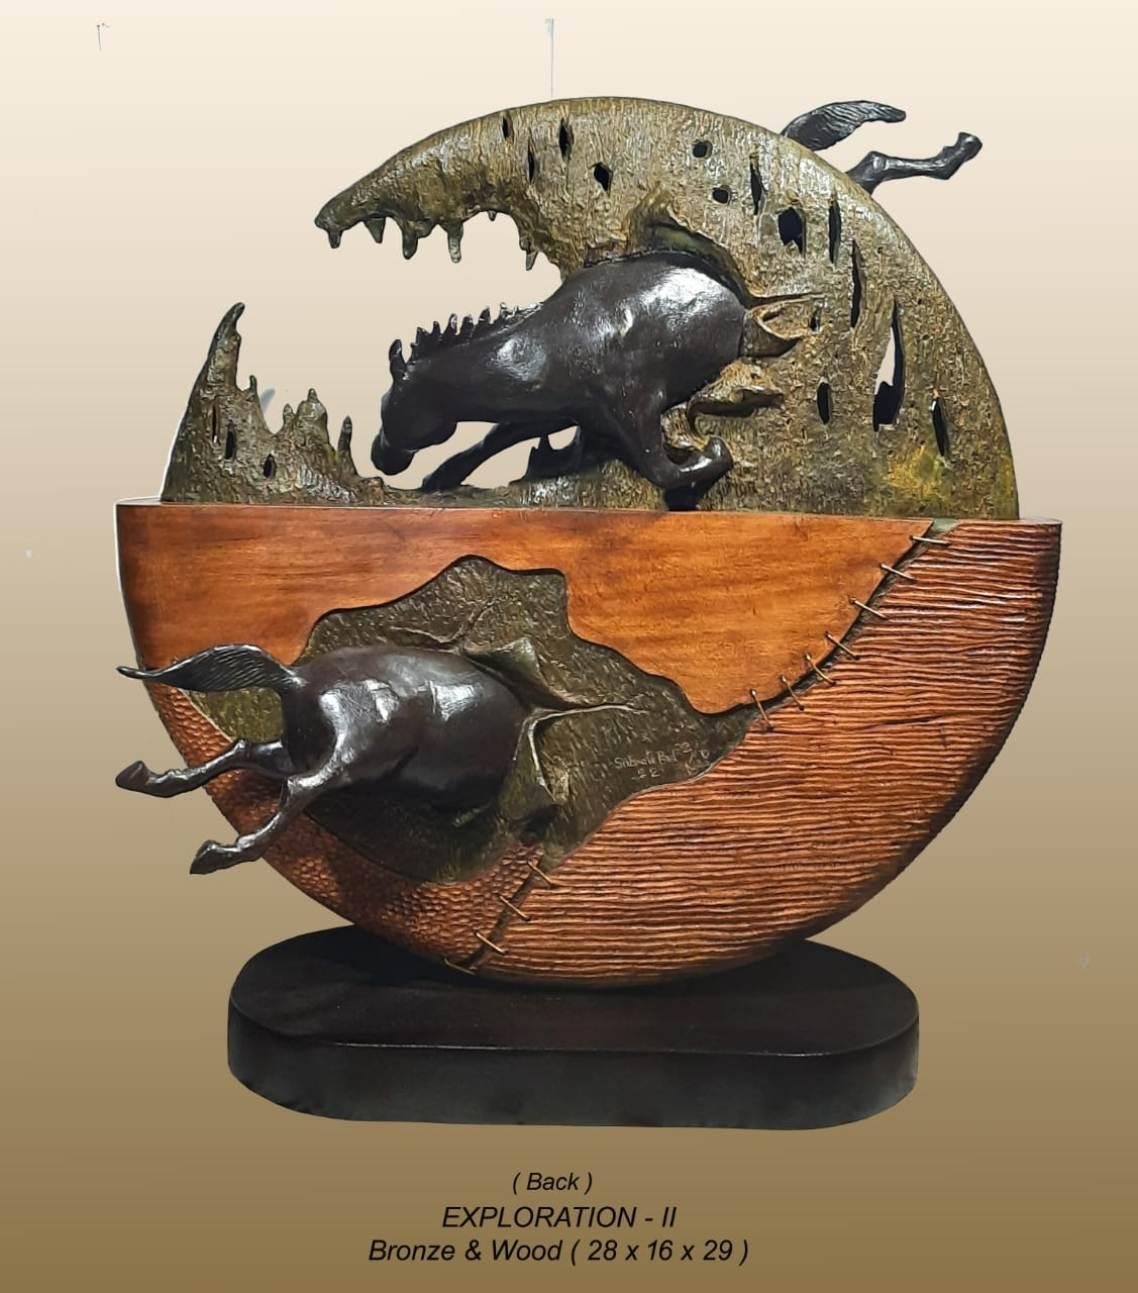 Subrata Paul - Exploration-II
Bronze & Wood, H 29 x W 28 x D 16 inches

About :
Subrata Paul ( b 1972) is one of the empanelled sculptors of Abundant Art Gallery. Subrata Paul’s favoured materials are bronze embellished with wood. His signature